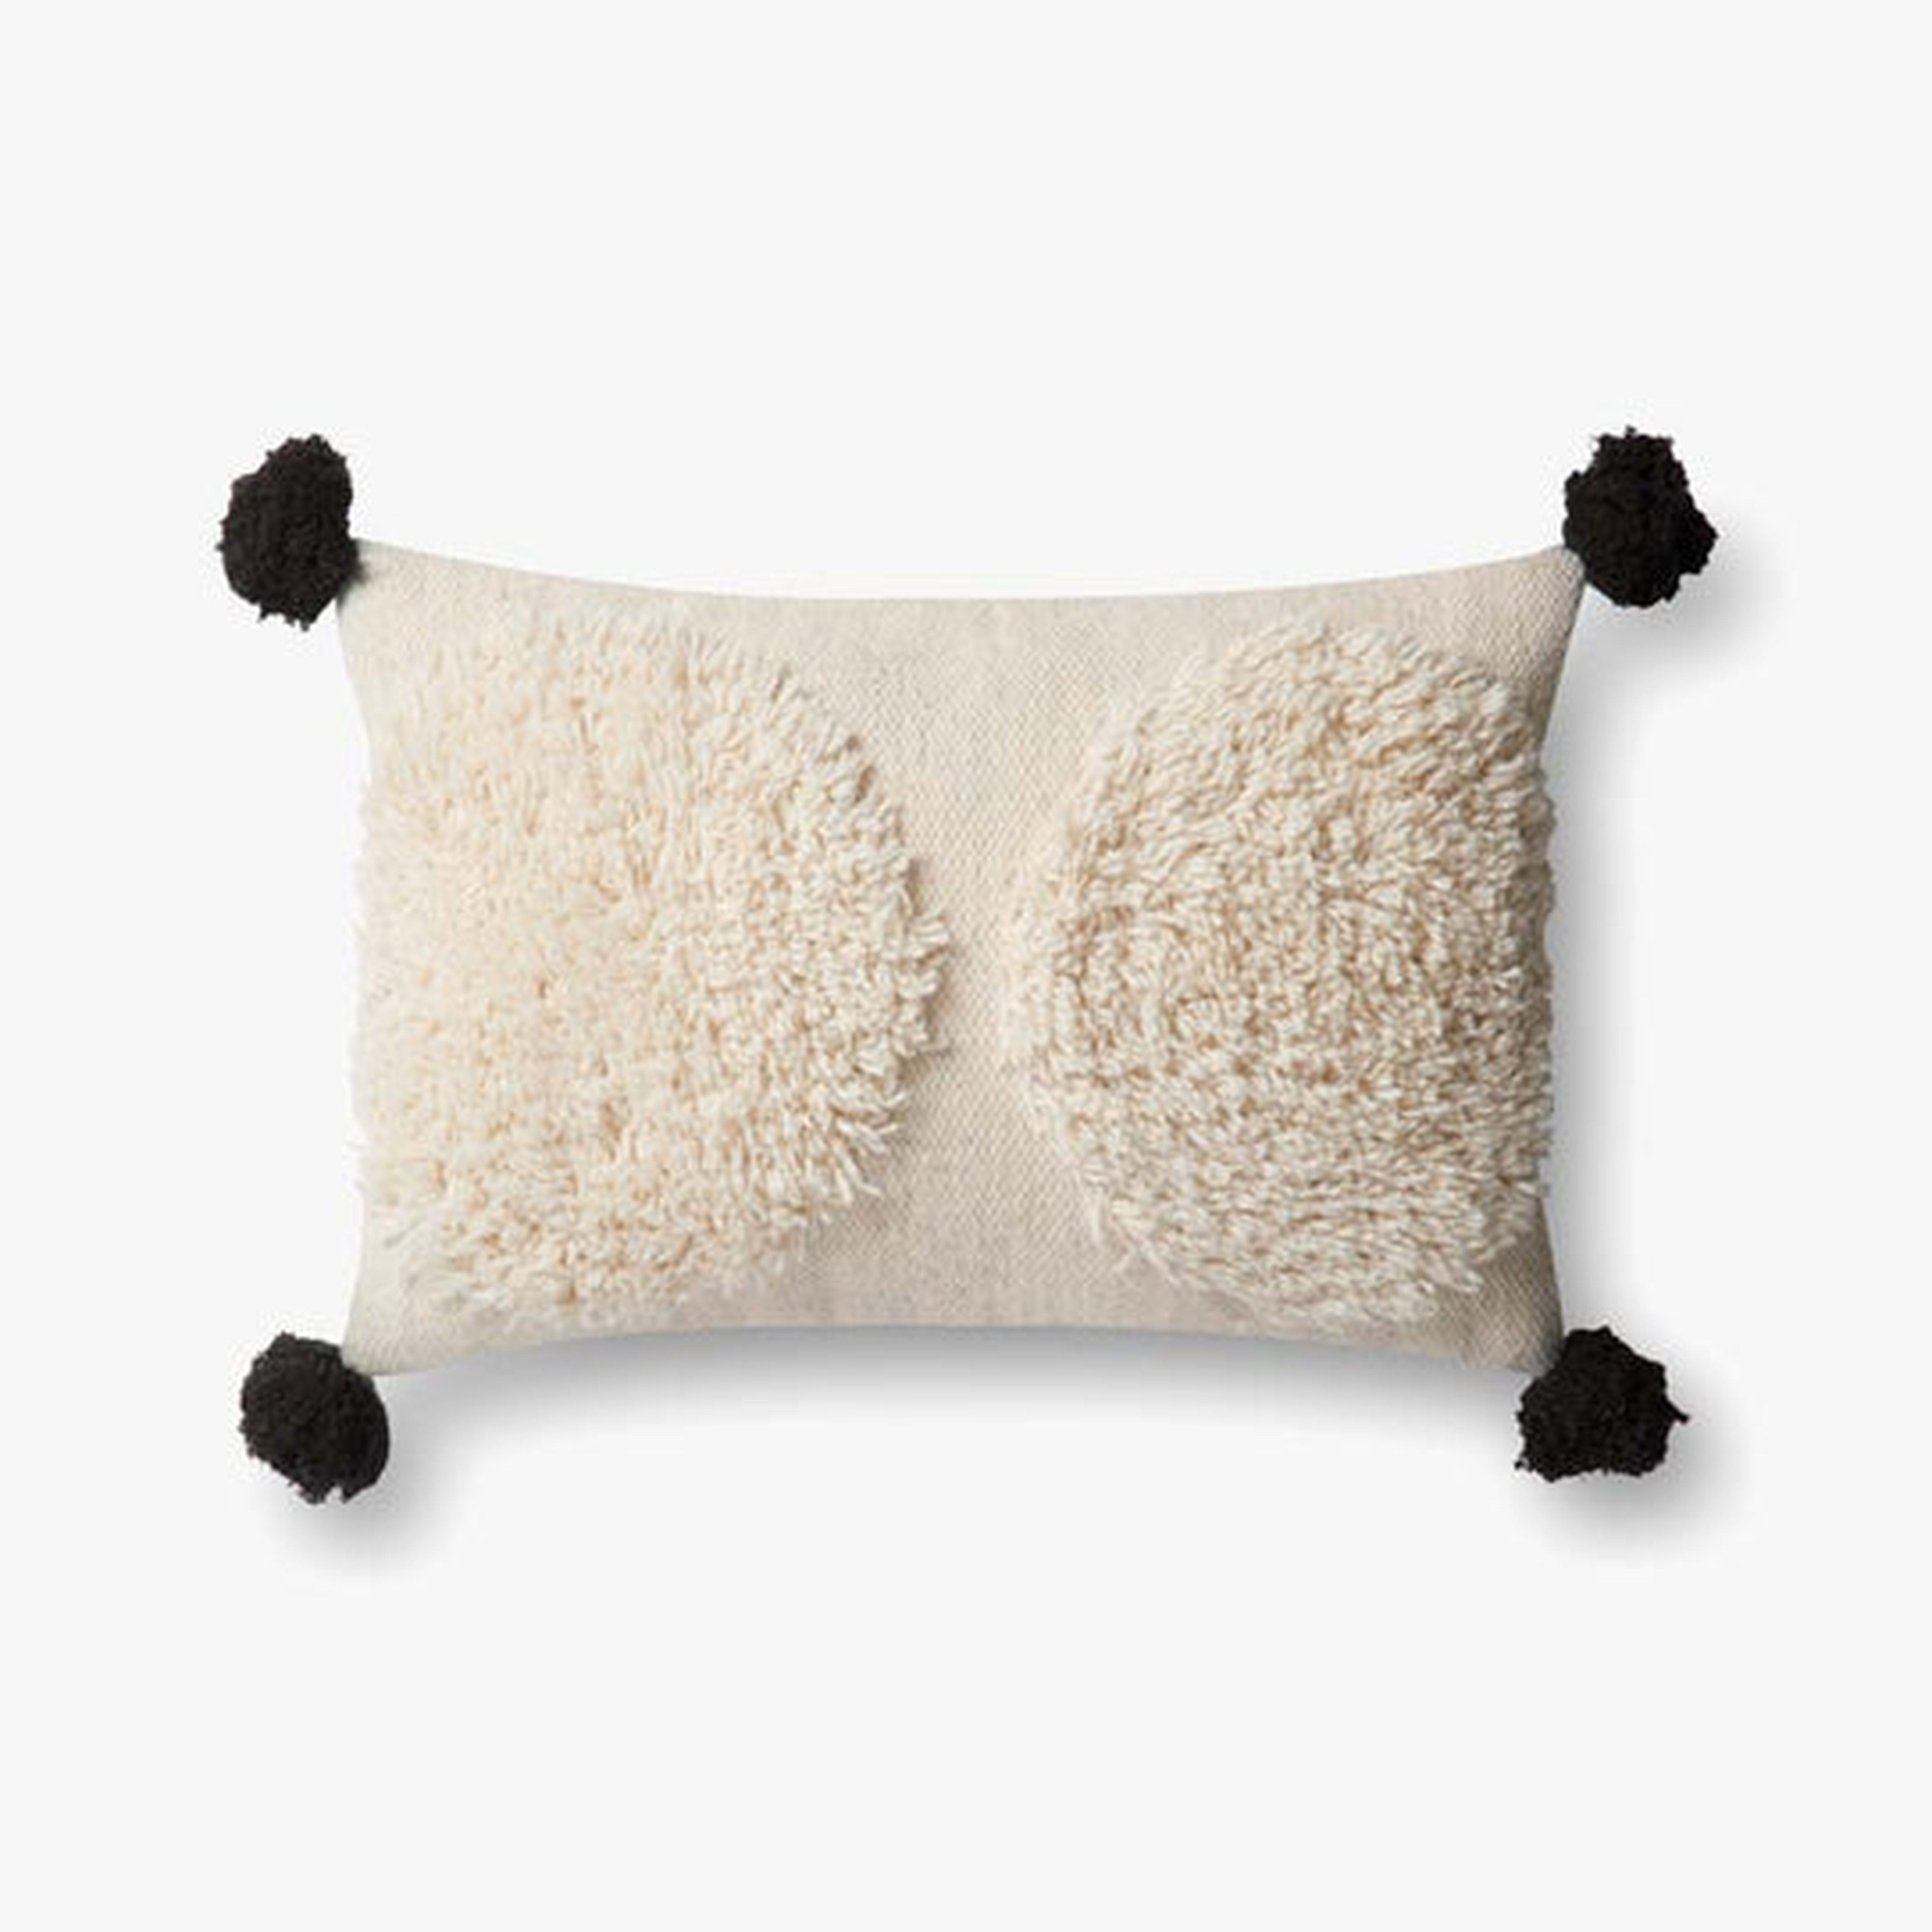 P0483 IVORY / BLACK Pillow - 13" x 21" with down Insert - Loloi Rugs